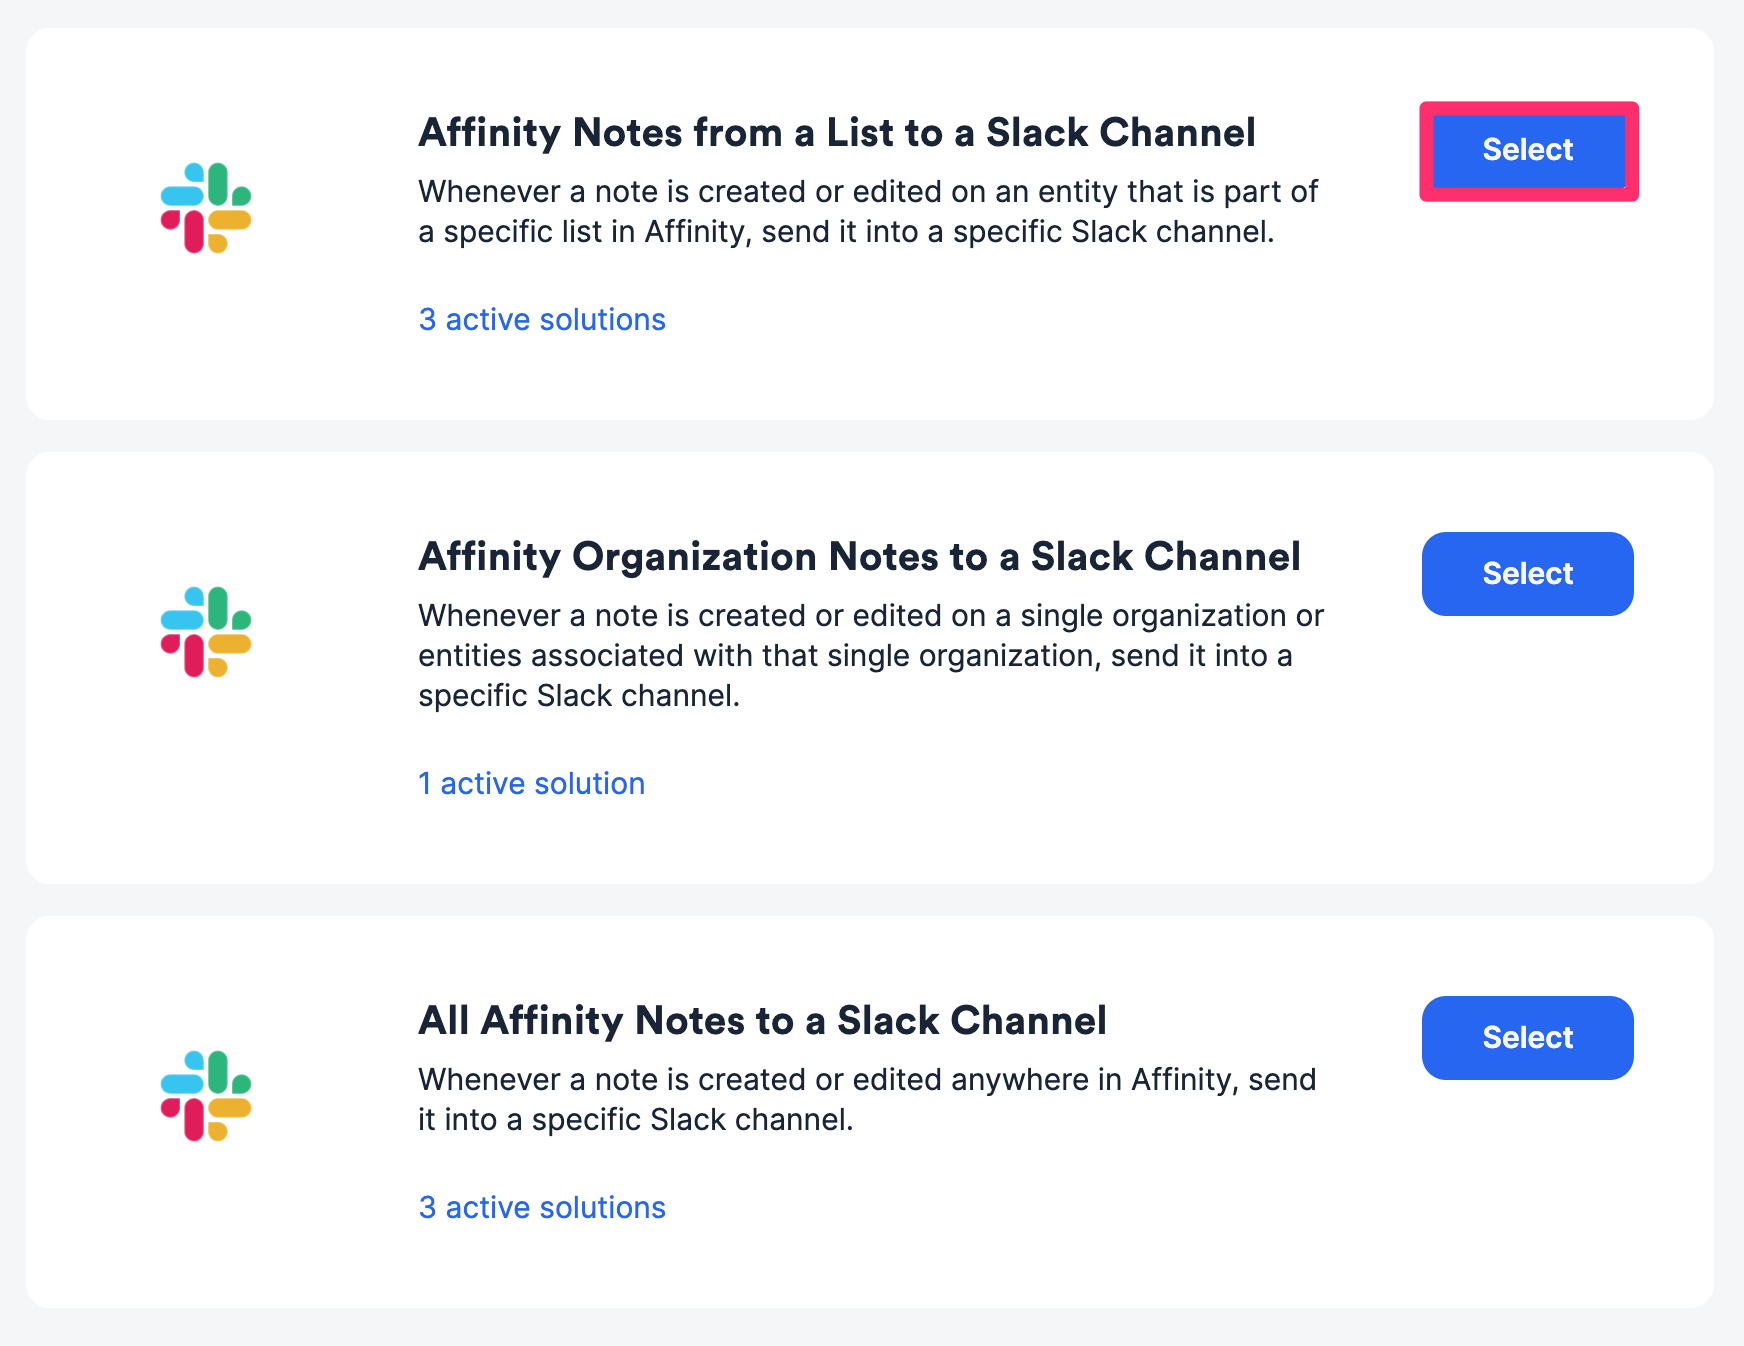 Affinity_Notes_from_a_List_to_a_Slack_Channel.png